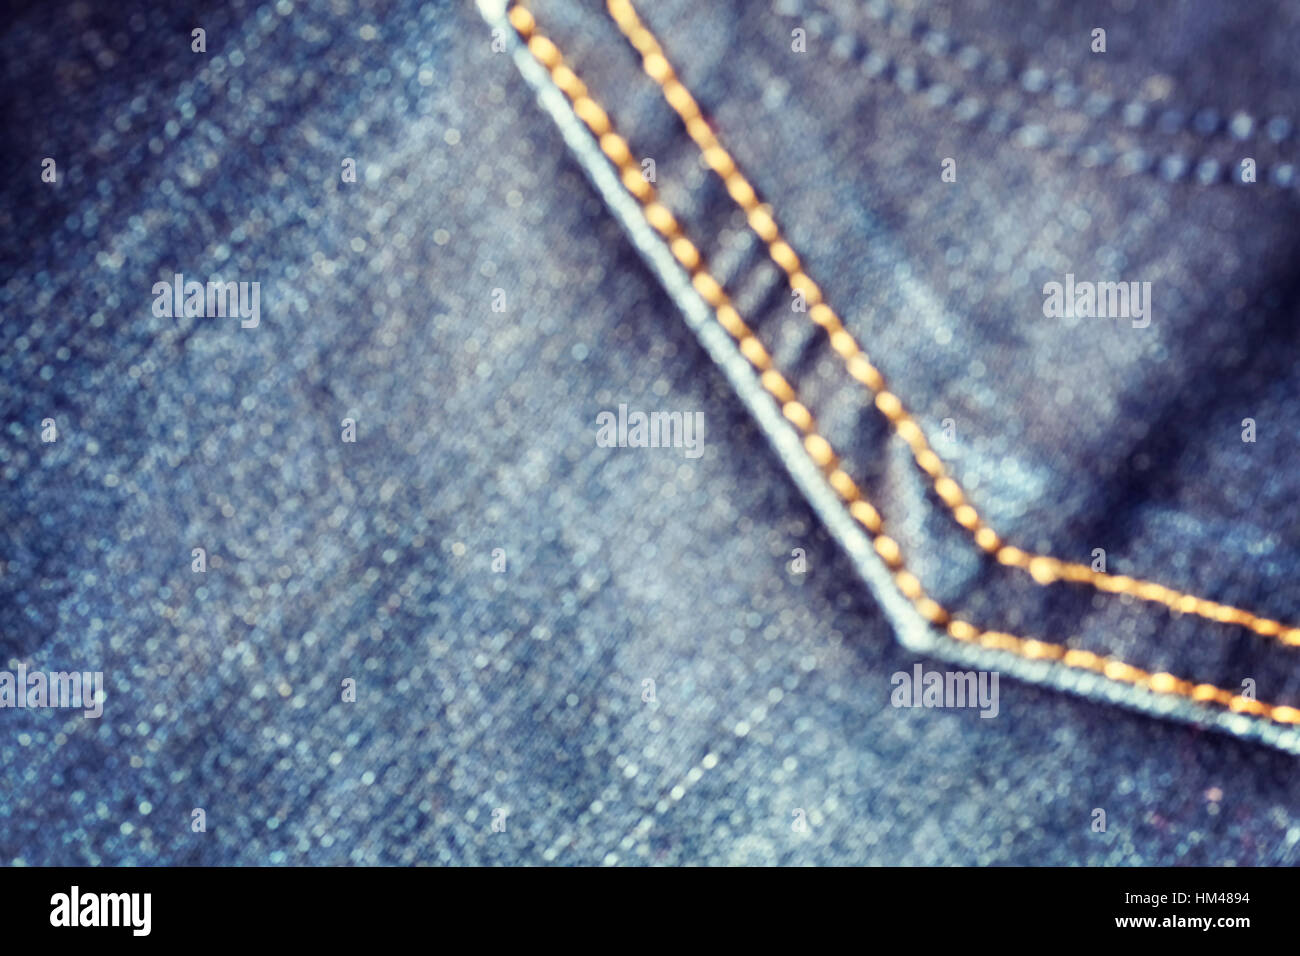 Blurred close up picture of blue jeans fabric with stitch, abstract background. Stock Photo